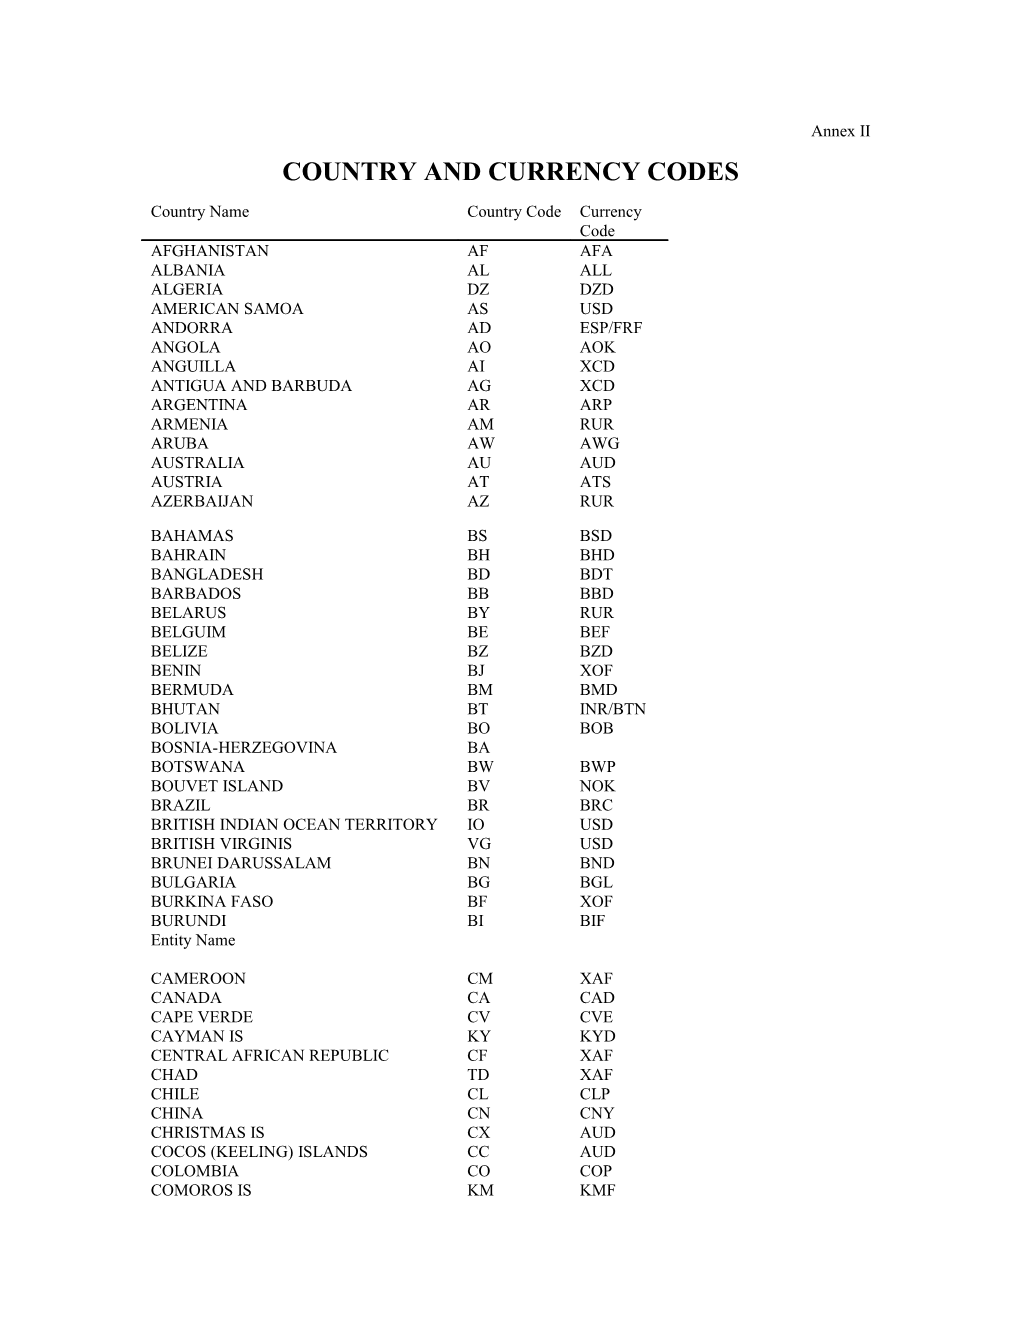 Country and Currency Codes